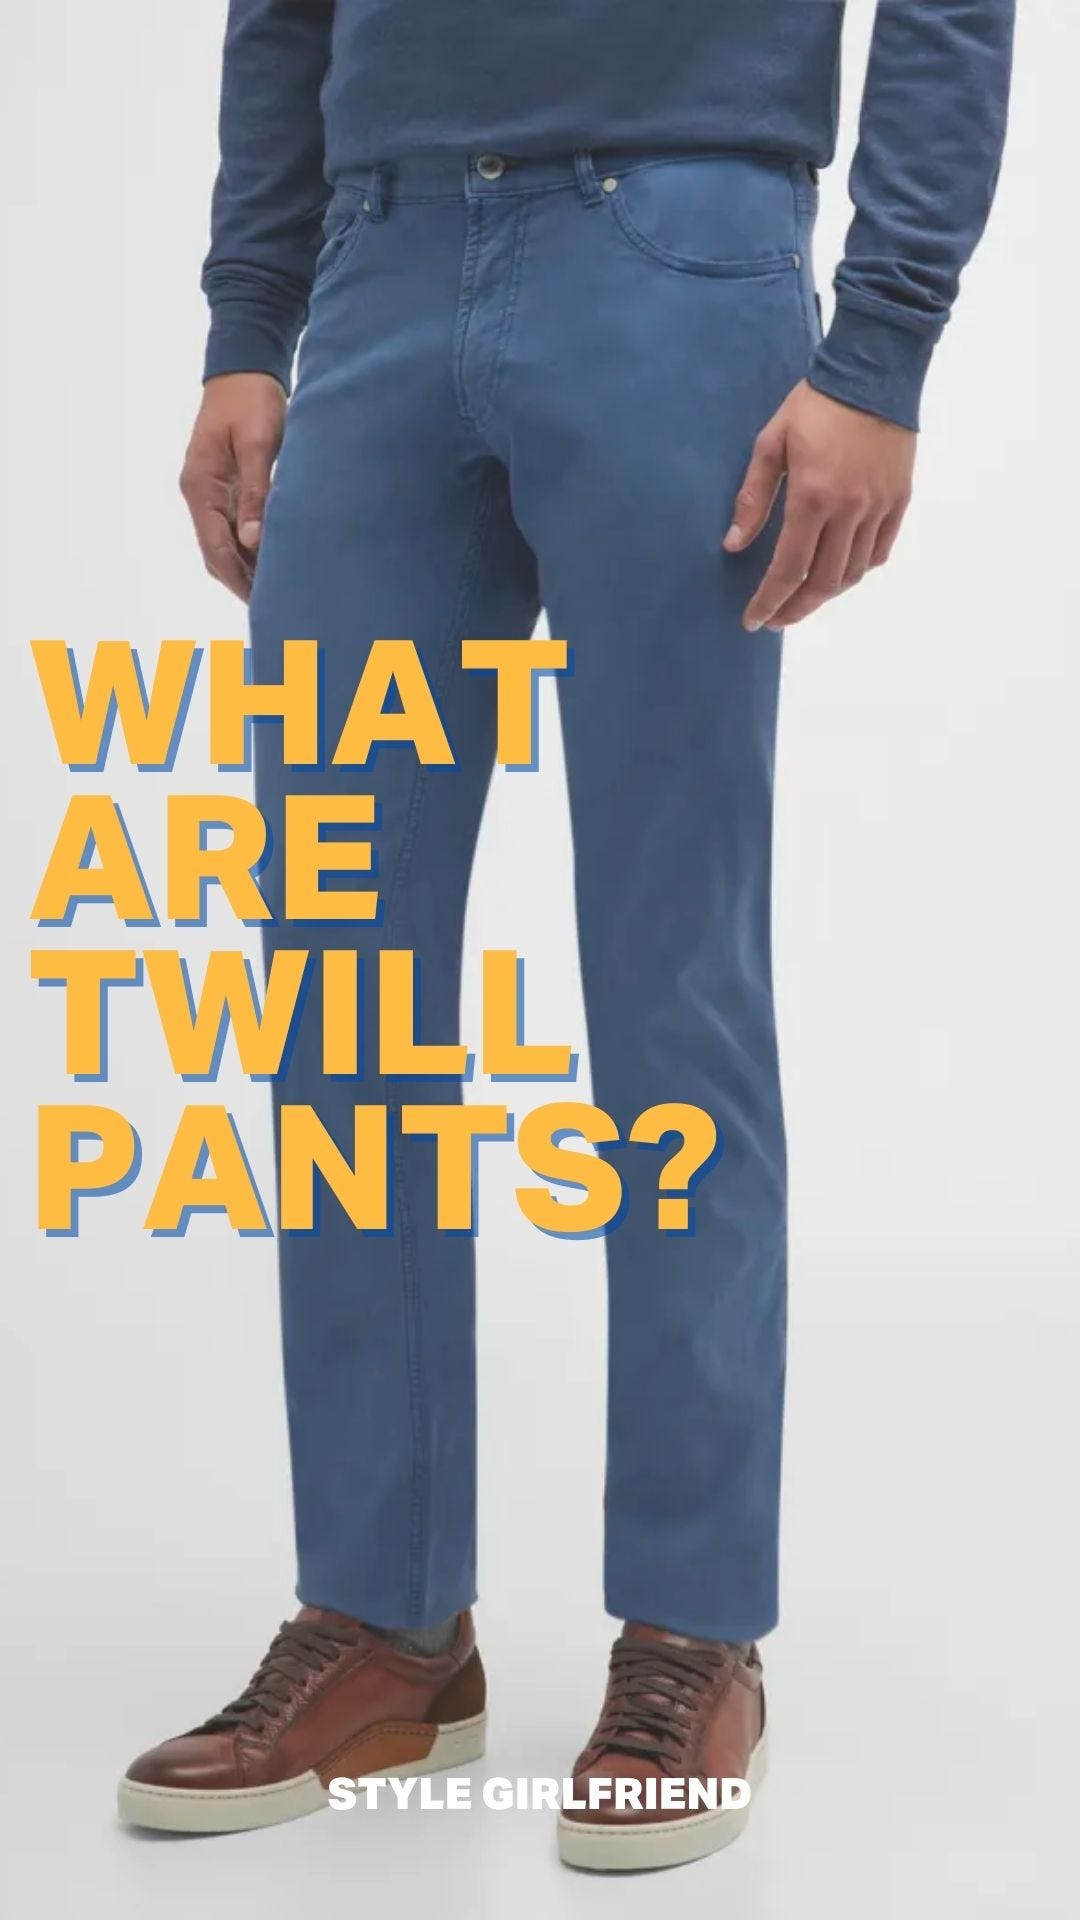 What is the difference between twill pants and jeans?